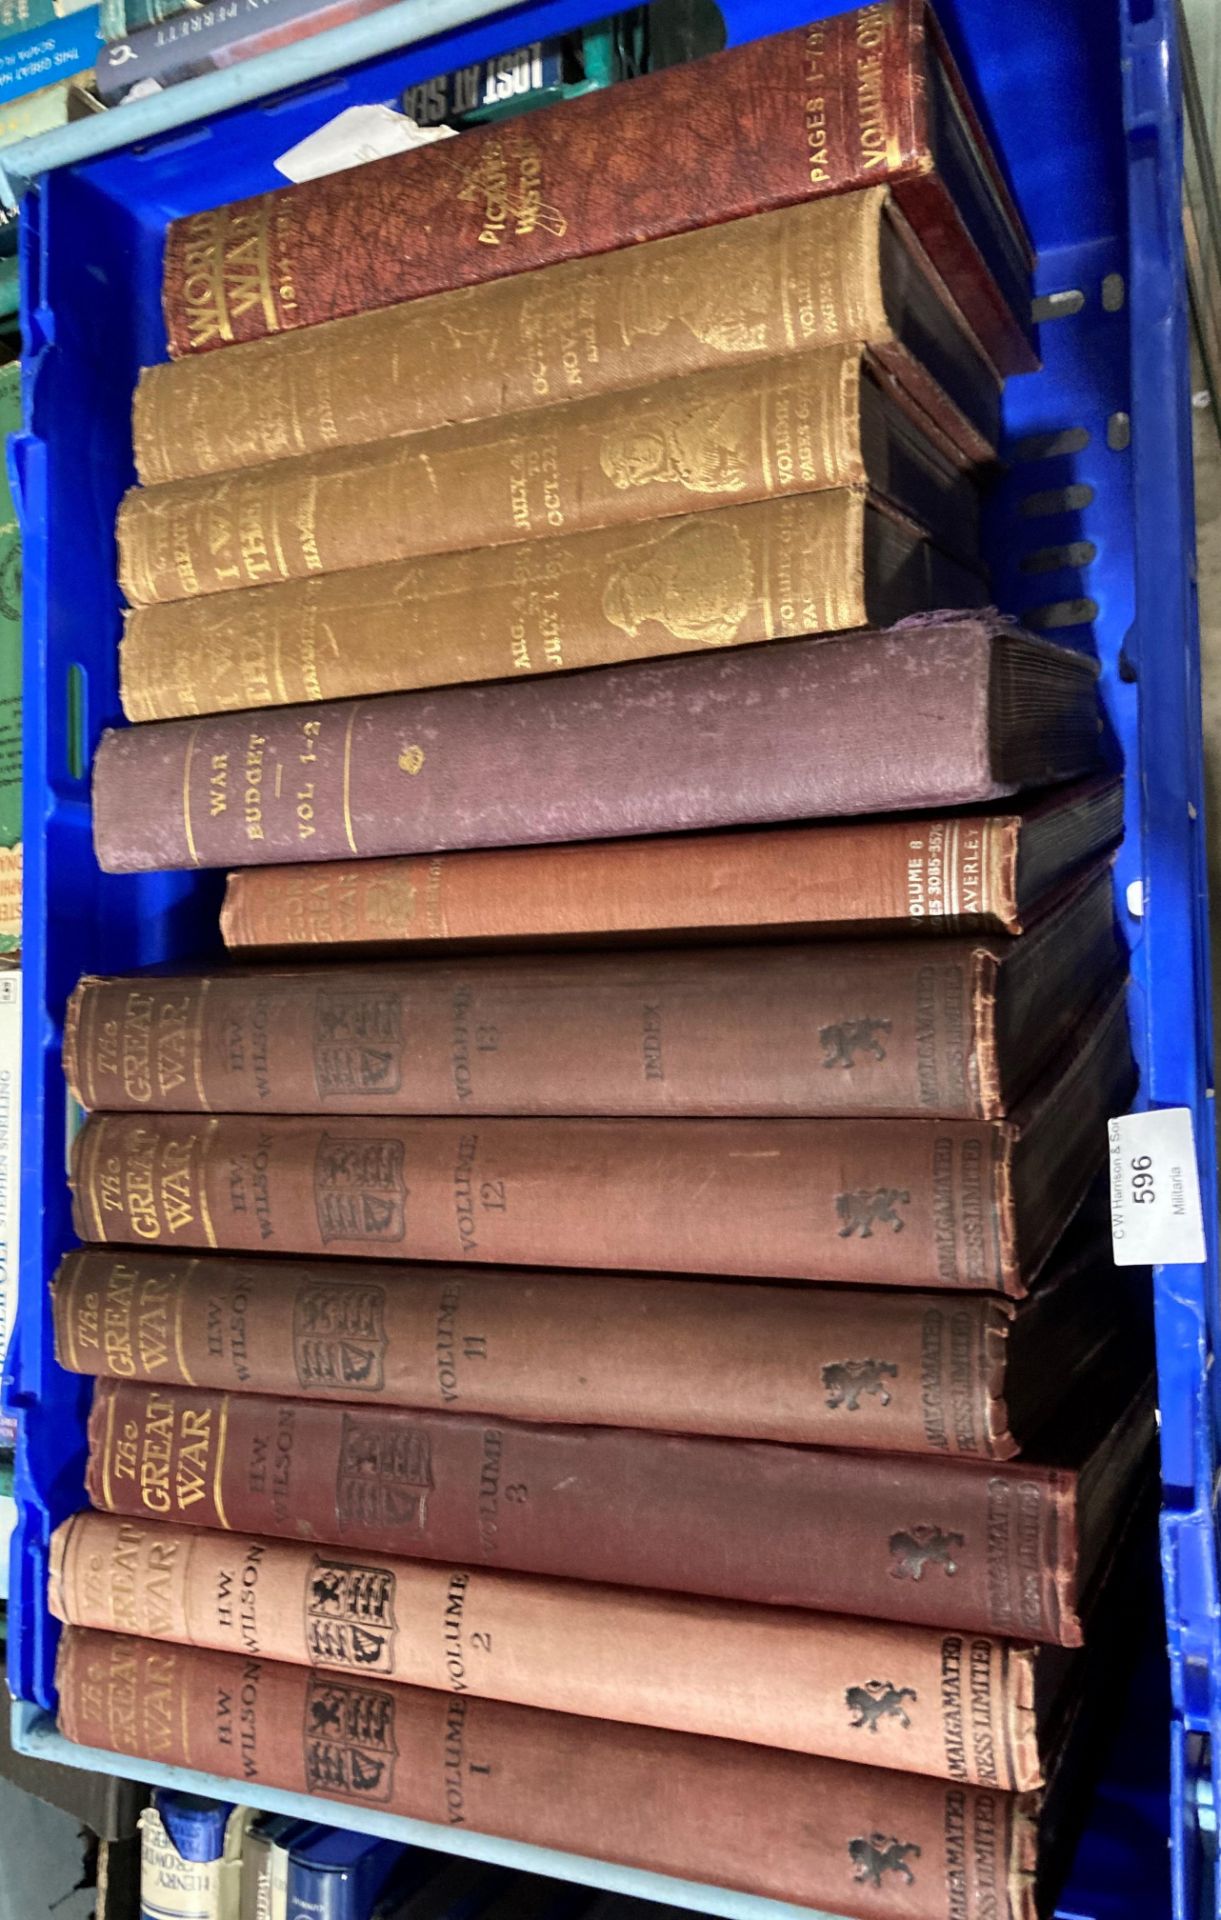 Contents to blue plastic tray - HW Wison six volumes of 'The Greater War' published by Amalgamated